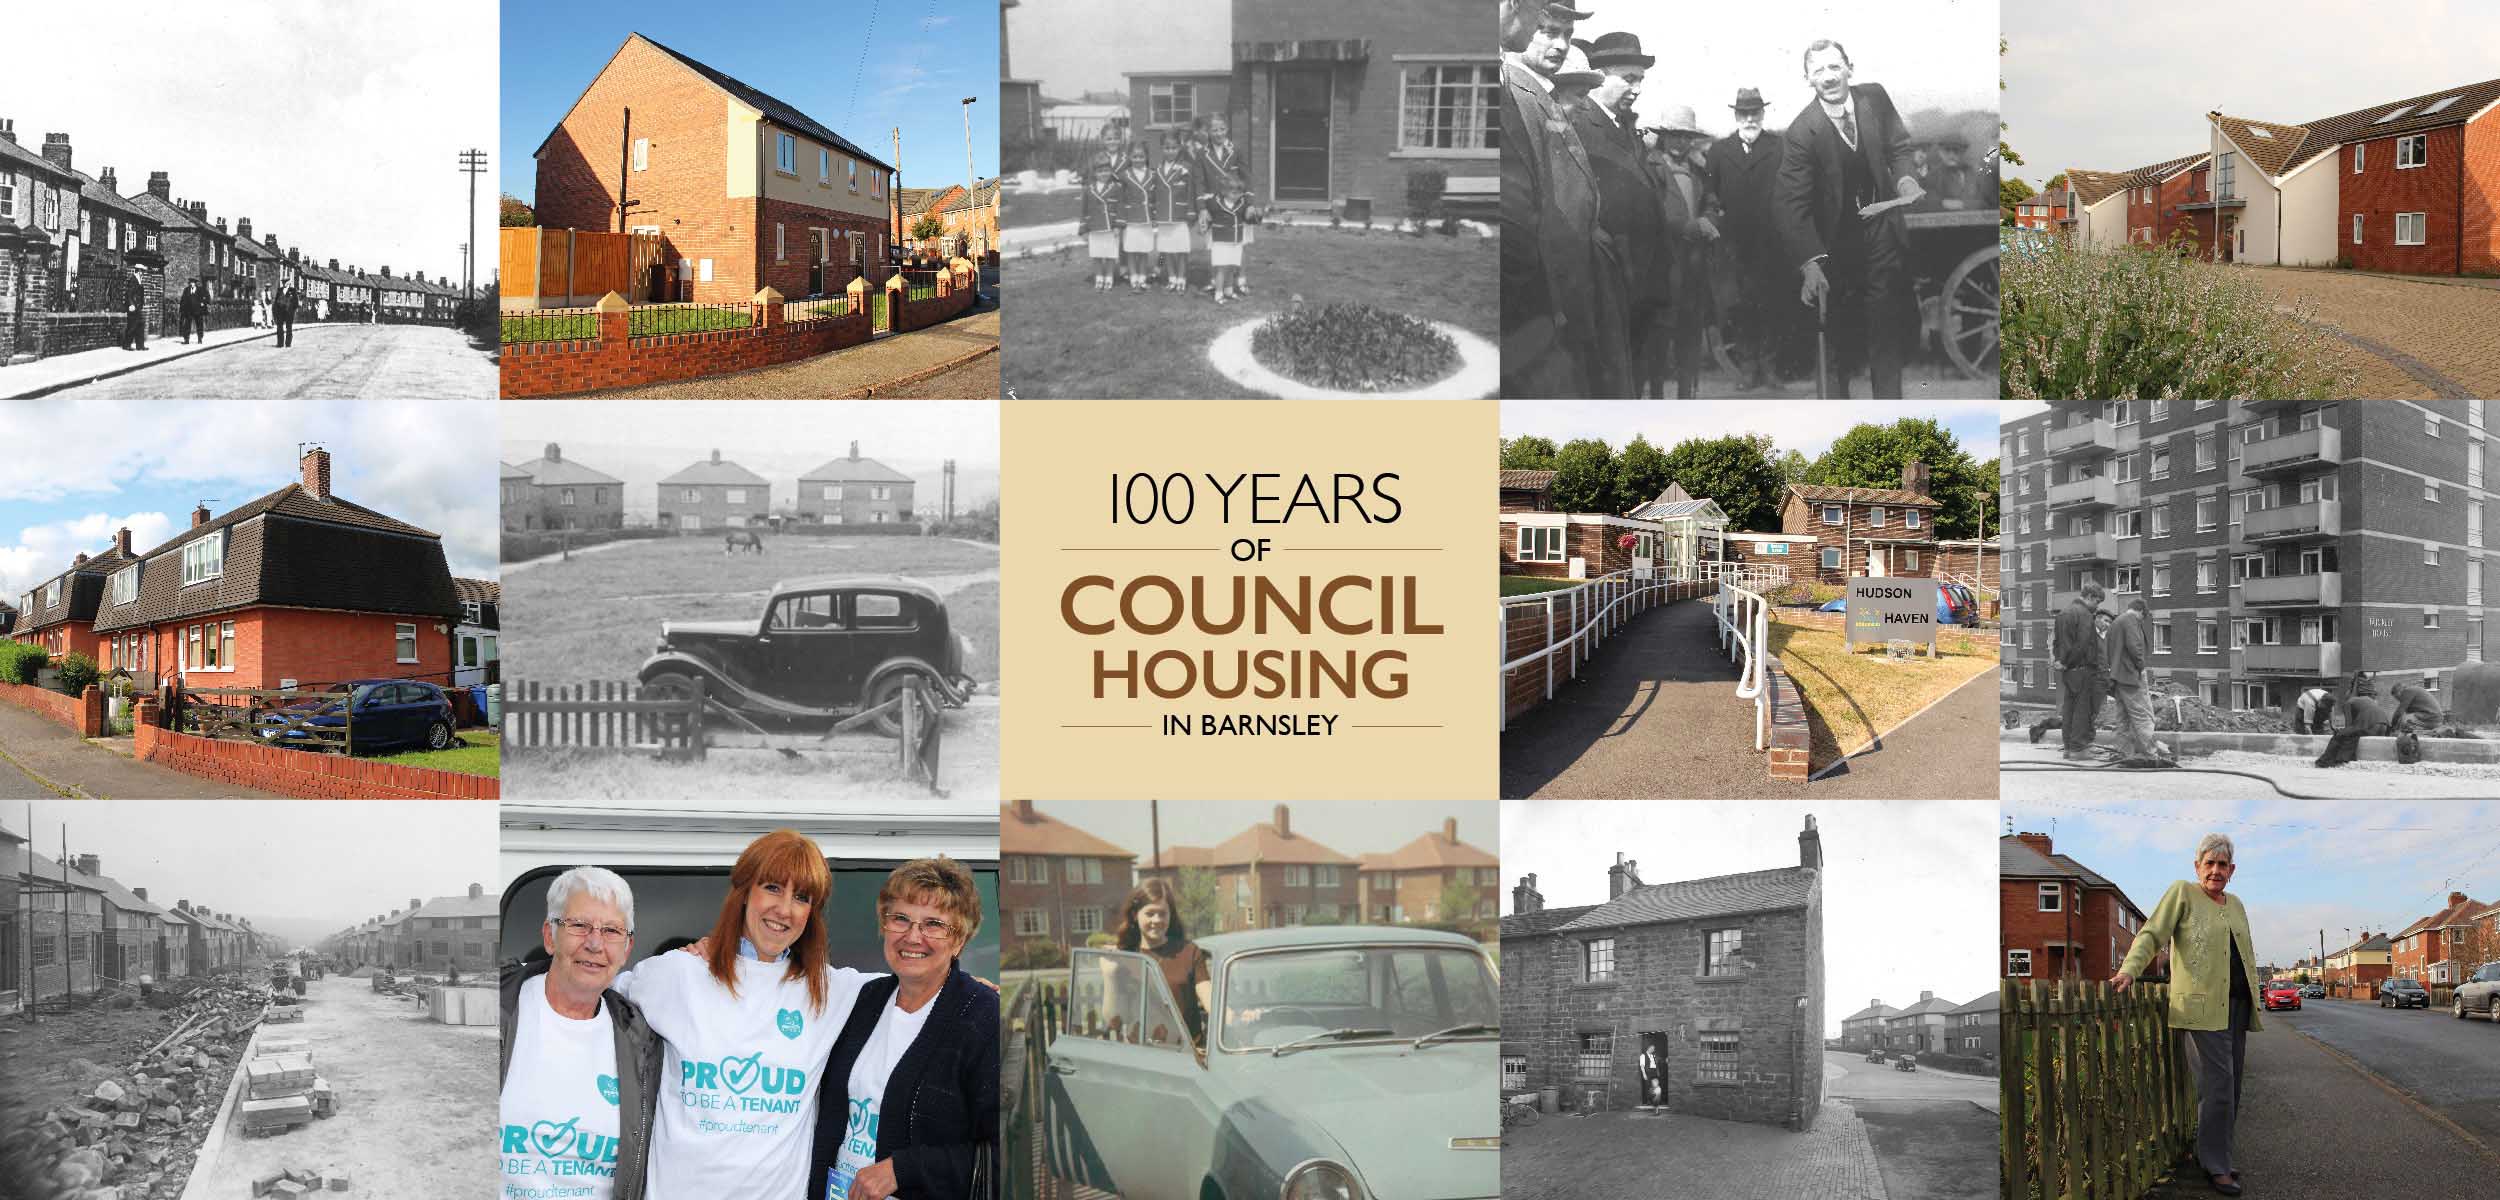 Celebrating 100 years of Council Housing in Barnsley